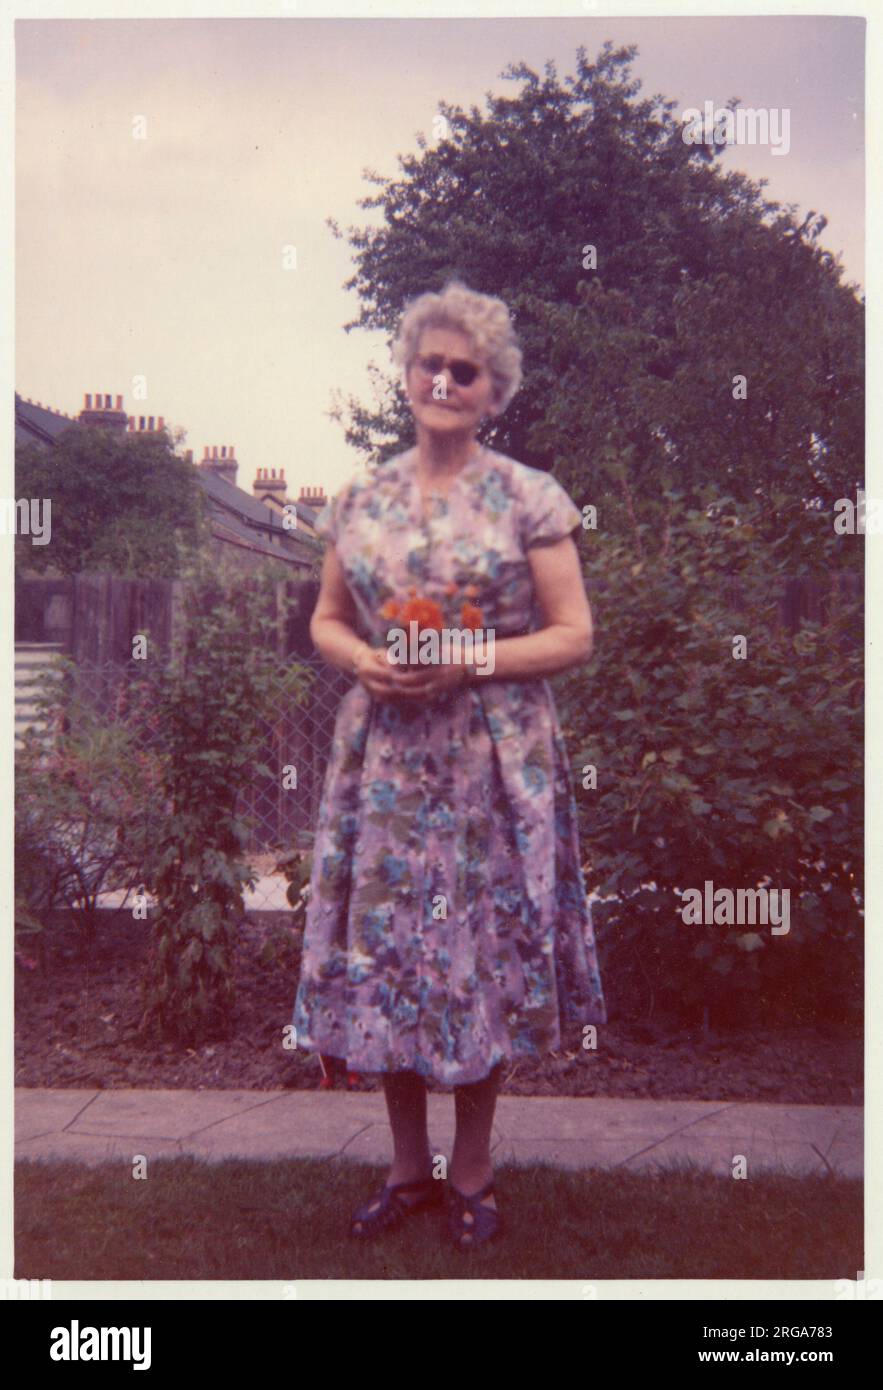 An older visually-impared woman (with an eye patch) stading in a neat suburban garden, holding a posy of small red flowers - July, 1961 Stock Photo